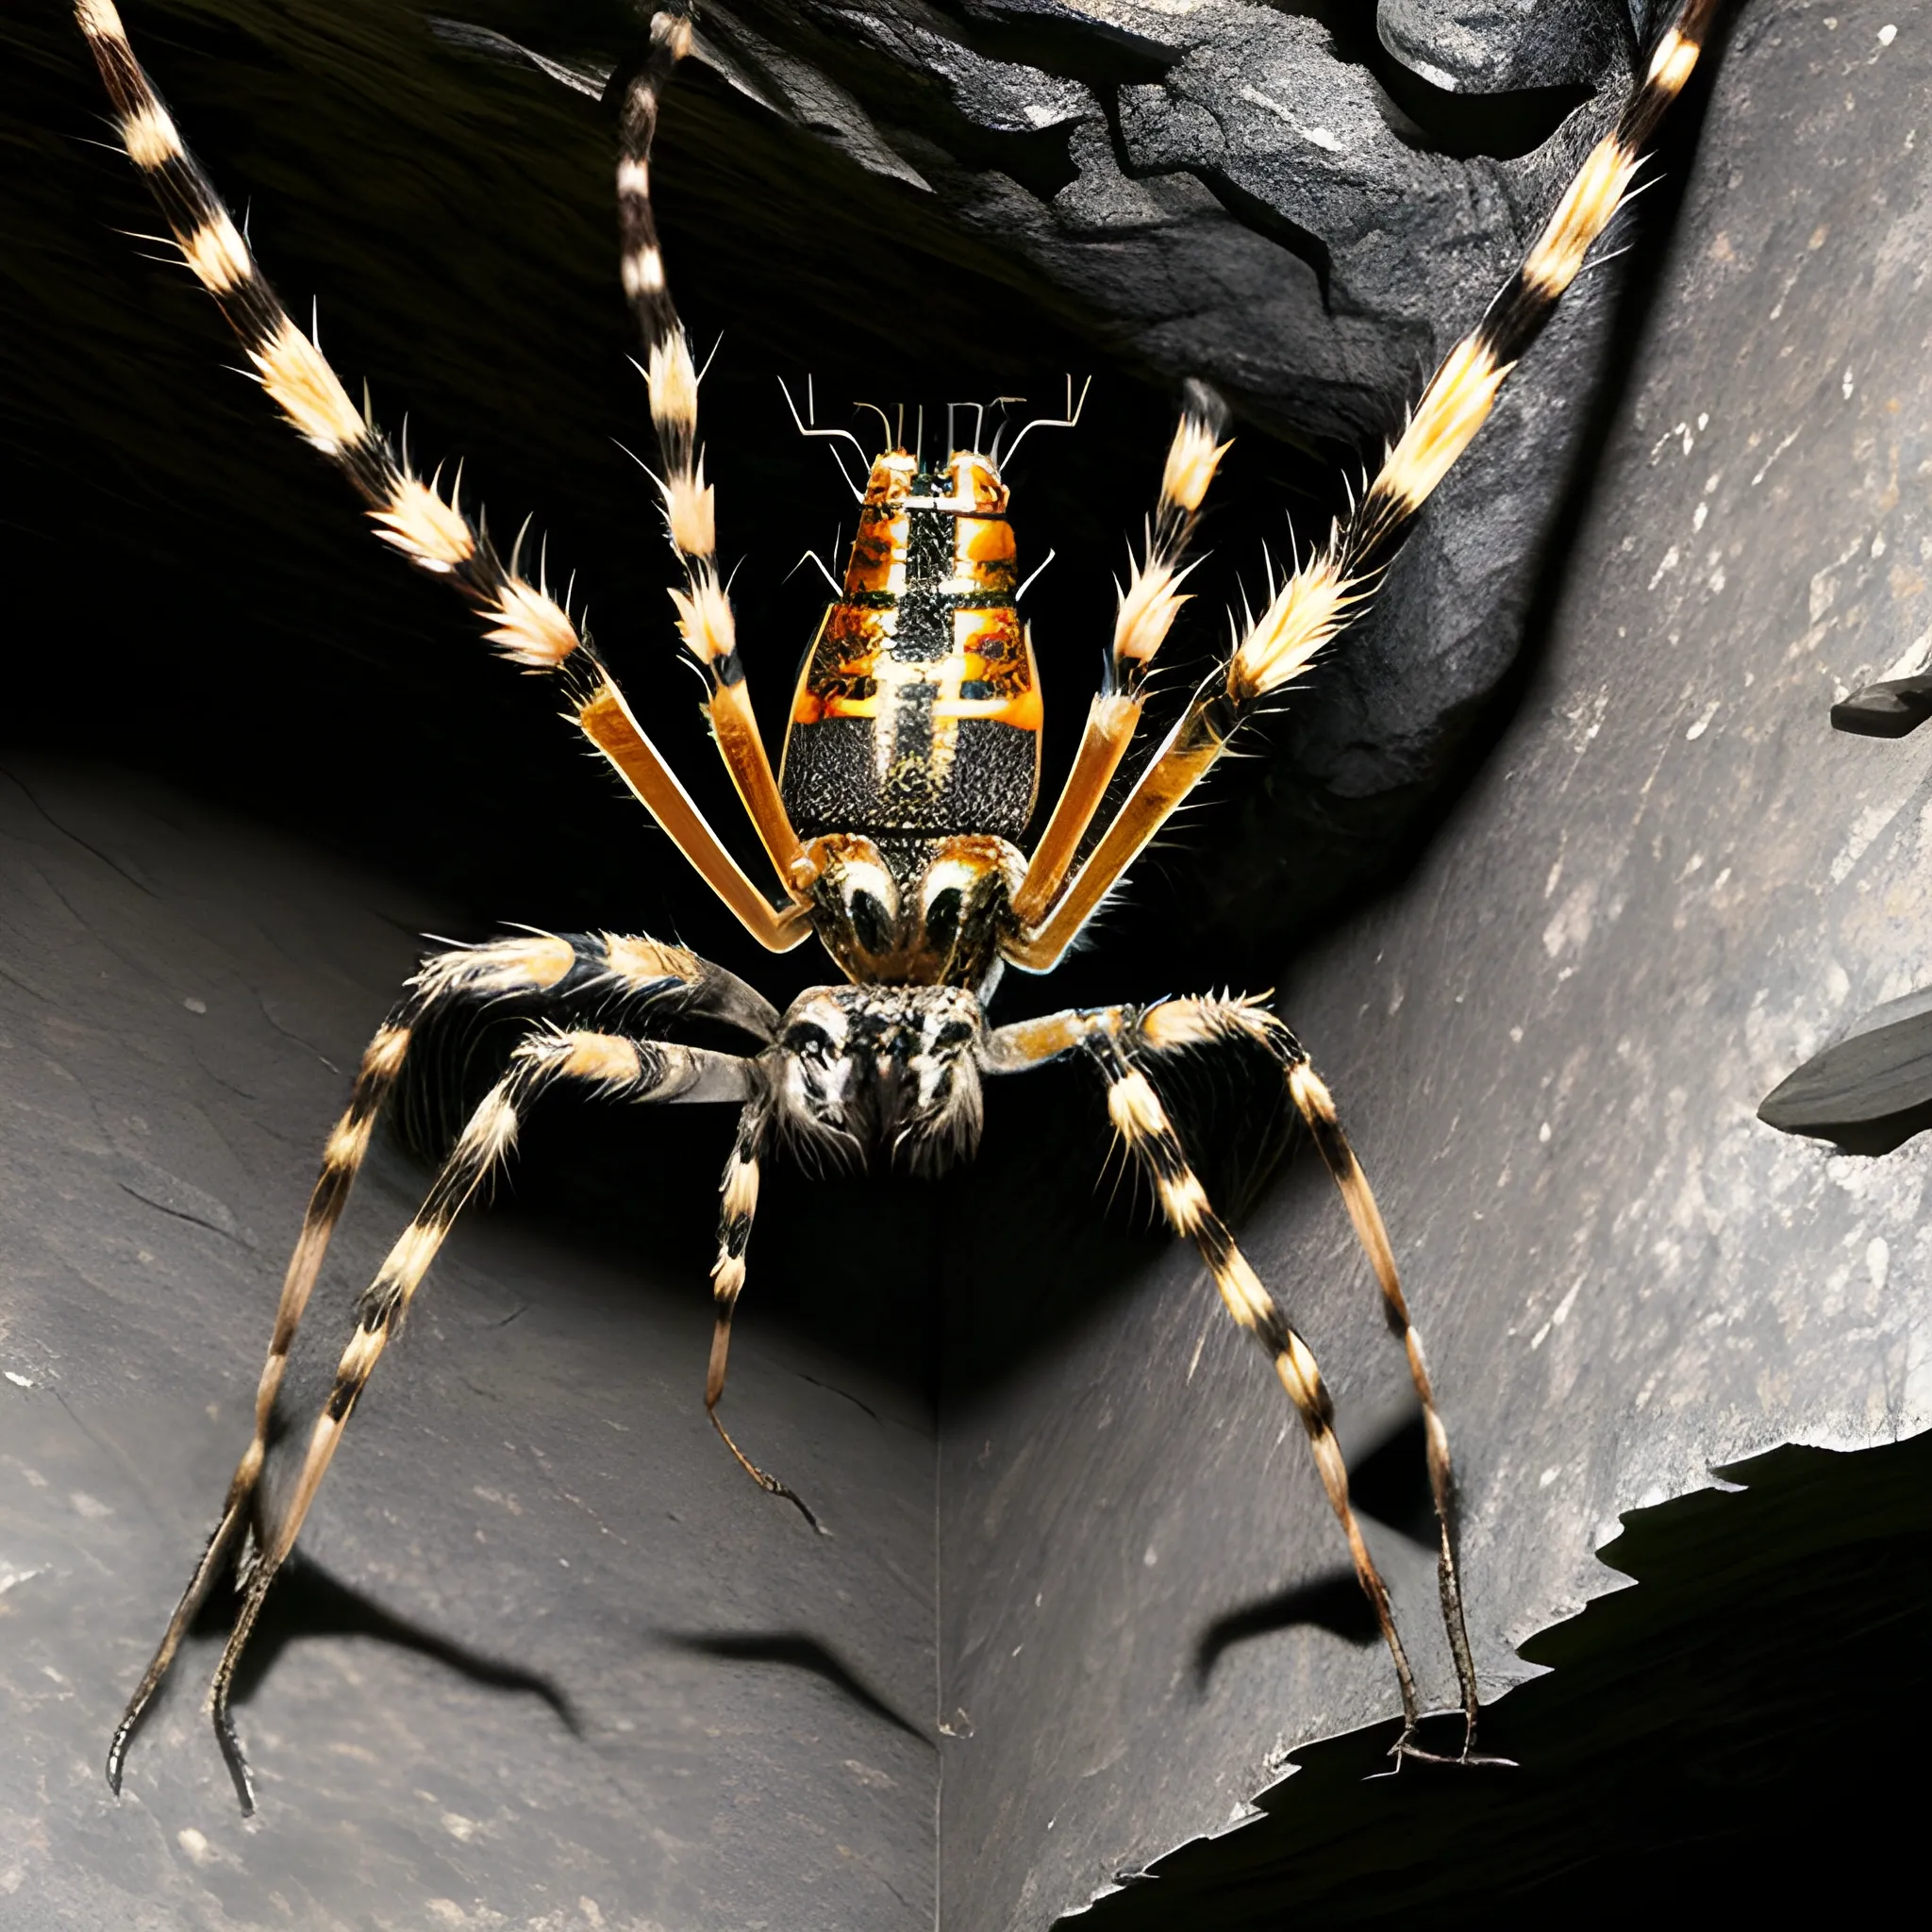 Appearance: The Giant Wolf Spider is an enormous arachnid, resembling a regular wolf spider but scaled up to a terrifying size. It has long, hairy legs, and its body can be up to 3 feet in length. The spider's exoskeleton is a mix of dark brown and black, camouflaging it in shadows and making it hard to spot in dimly lit environments. Its multiple eyes gleam with an eerie luminescence, providing it with excellent night vision.

Features: Giant Wolf Spiders possess venomous fangs that they use to paralyze their prey. While their venom is not usually fatal to human-sized creatures, it can cause temporary paralysis and intense pain. They are incredibly agile and quick, making them adept ambush predators.

Habitat: Giant Wolf Spiders are most commonly found in dark and damp environments, such as caves, forests, and subterranean tunnels. They are skilled at weaving complex webs that serve as both traps for their prey and a means to detect nearby movement.

Behavior: These arachnids are solitary creatures and prefer to hunt alone. Despite their size, they are surprisingly stealthy and capable of stalking their prey unnoticed until they strike. They are skilled climbers and can scale walls and ceilings with ease.

Role in the World: In your DND world, Giant Wolf Spiders might be common threats in certain regions, especially in dense forests or caves. They could be encountered as natural inhabitants of the wilderness or serve as guardians to ancient ruins and abandoned places. Their venomous bite and ability to ensnare their prey in webs make them formidable foes for adventurers.

Encountering a Giant Wolf Spider in your campaign could lead to tense and suspenseful moments. The spiders might ambush adventurers, trying to paralyze them with their venom before delivering a deadly bite. Players might need to exercise caution and utilize strategies to counter the spider's agility and web traps effectively. Additionally, the presence of Giant Wolf Spiders can add an element of danger and fear to the wild and untamed areas of your world, making players wary of what lurks in the shadows and the darkness.